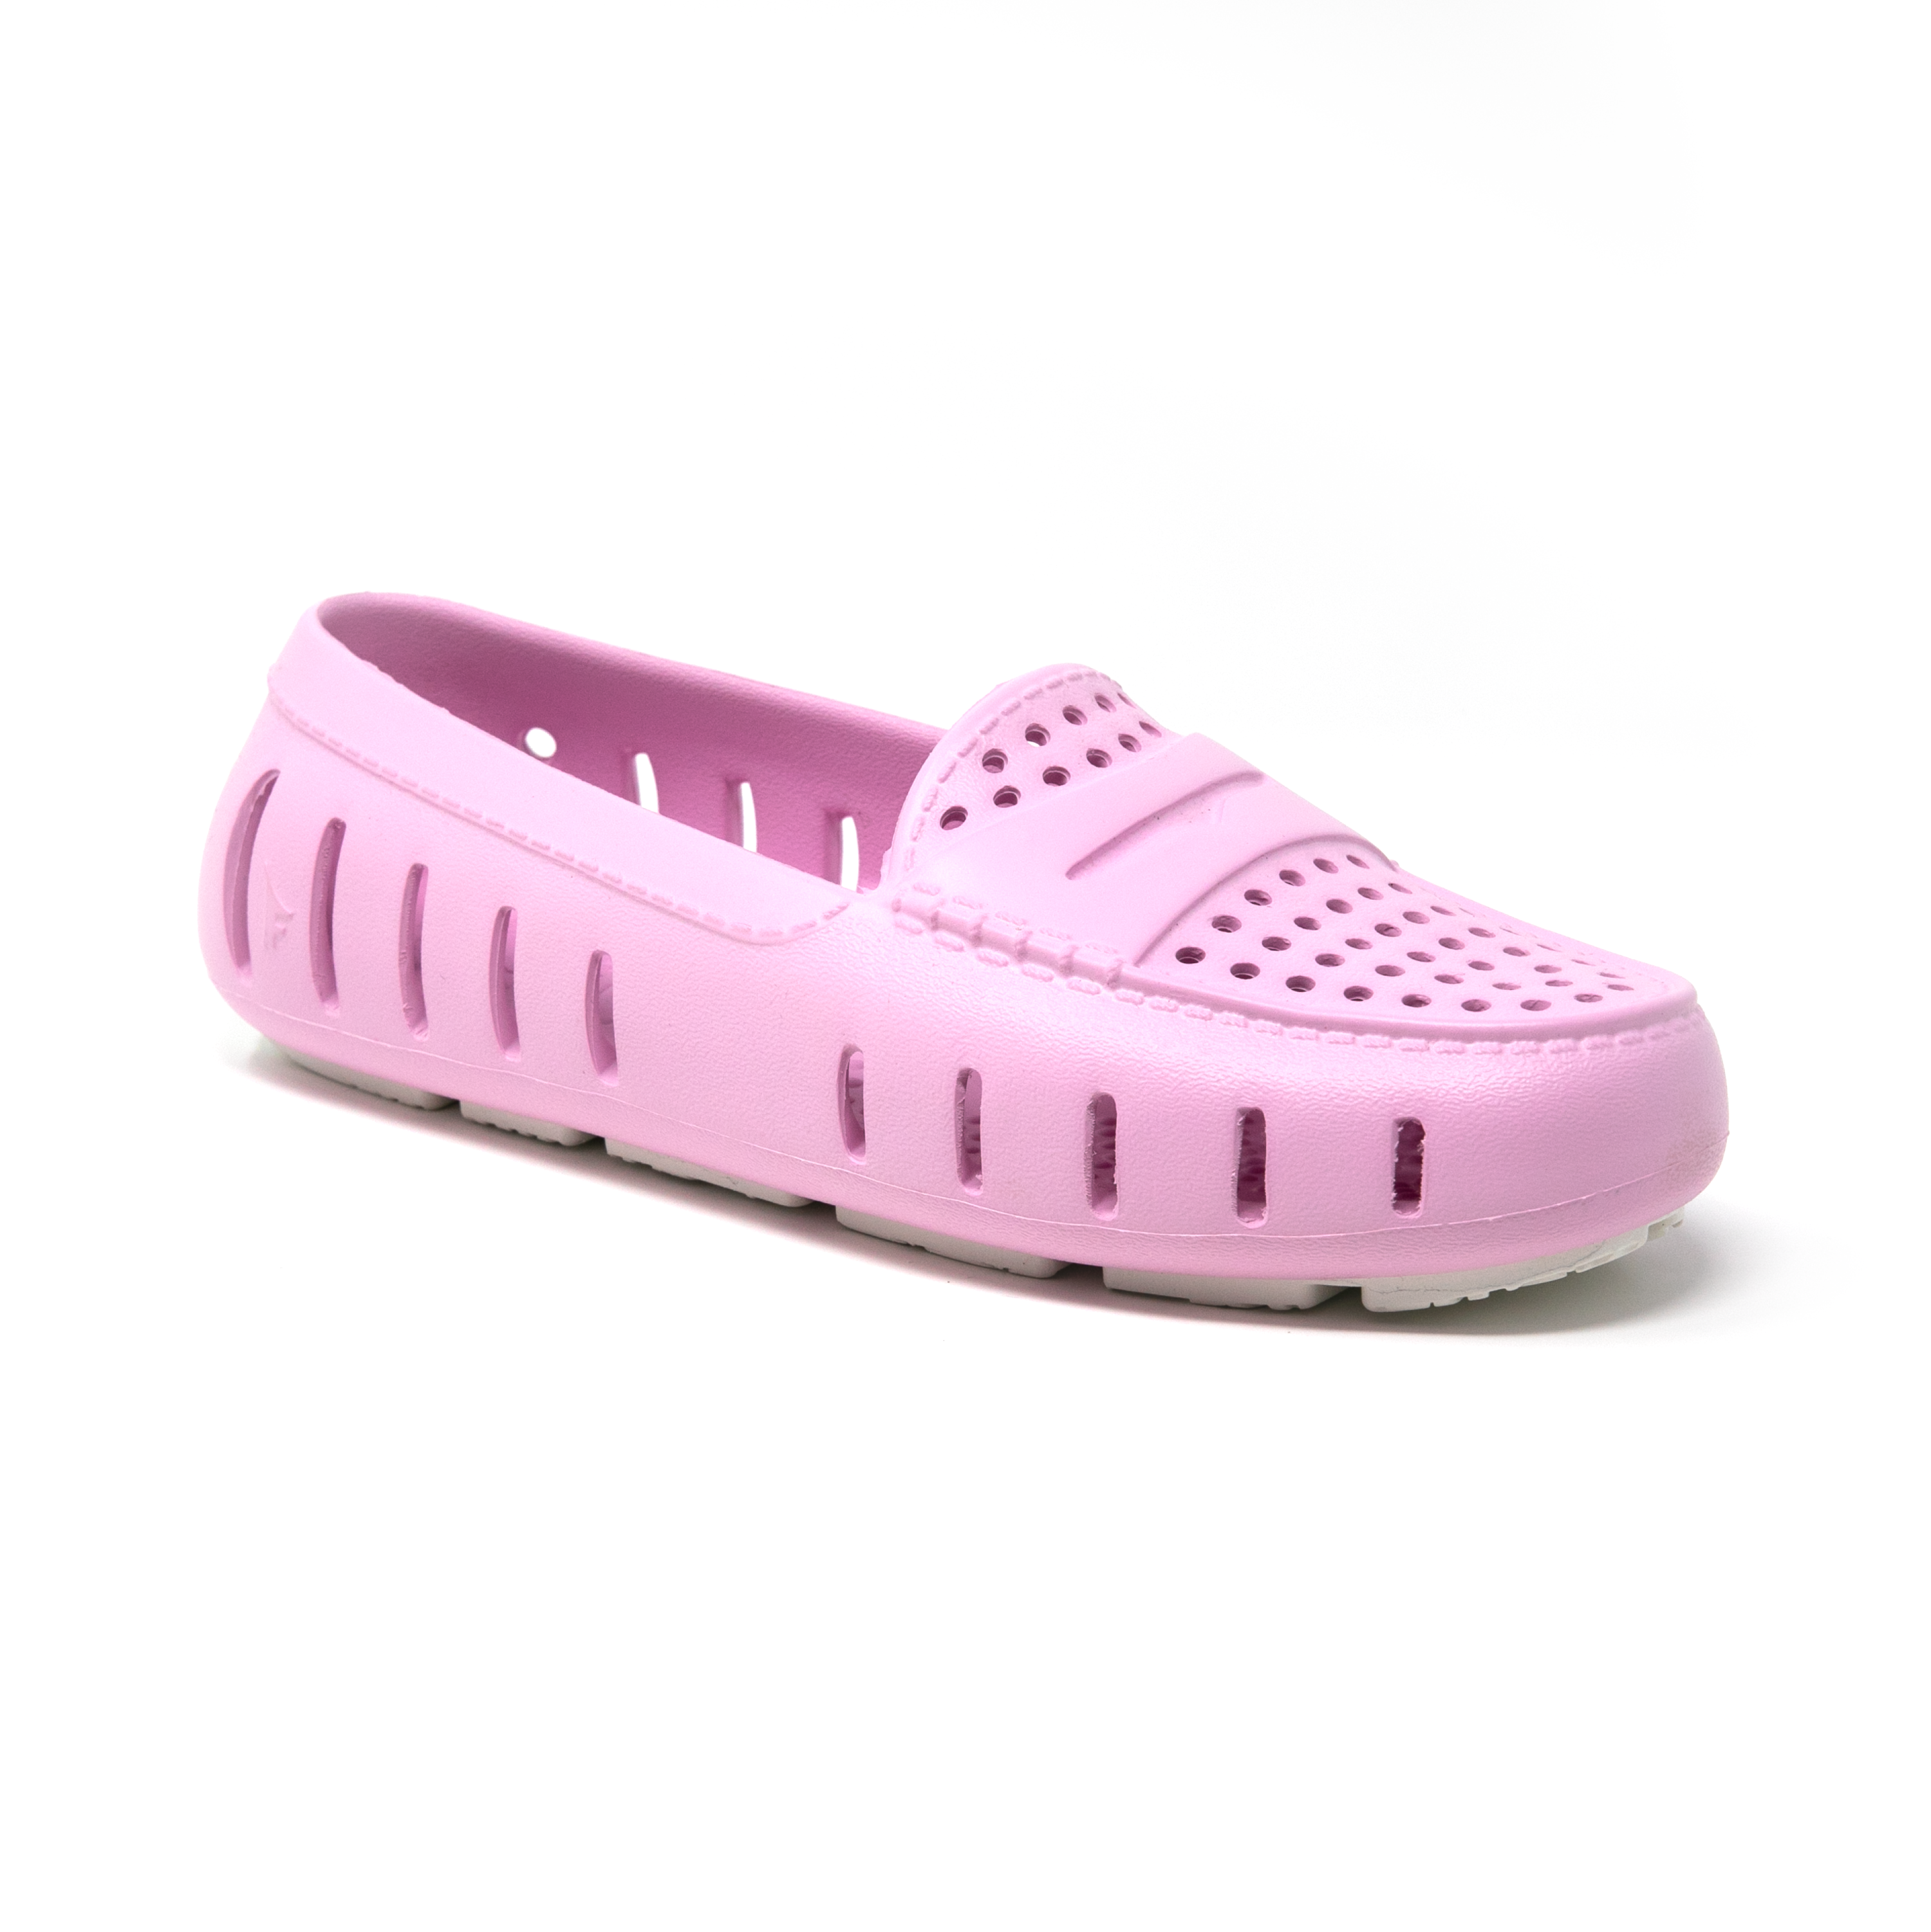 SWEET LILAC/BRIGHT WHITE - WOMENS